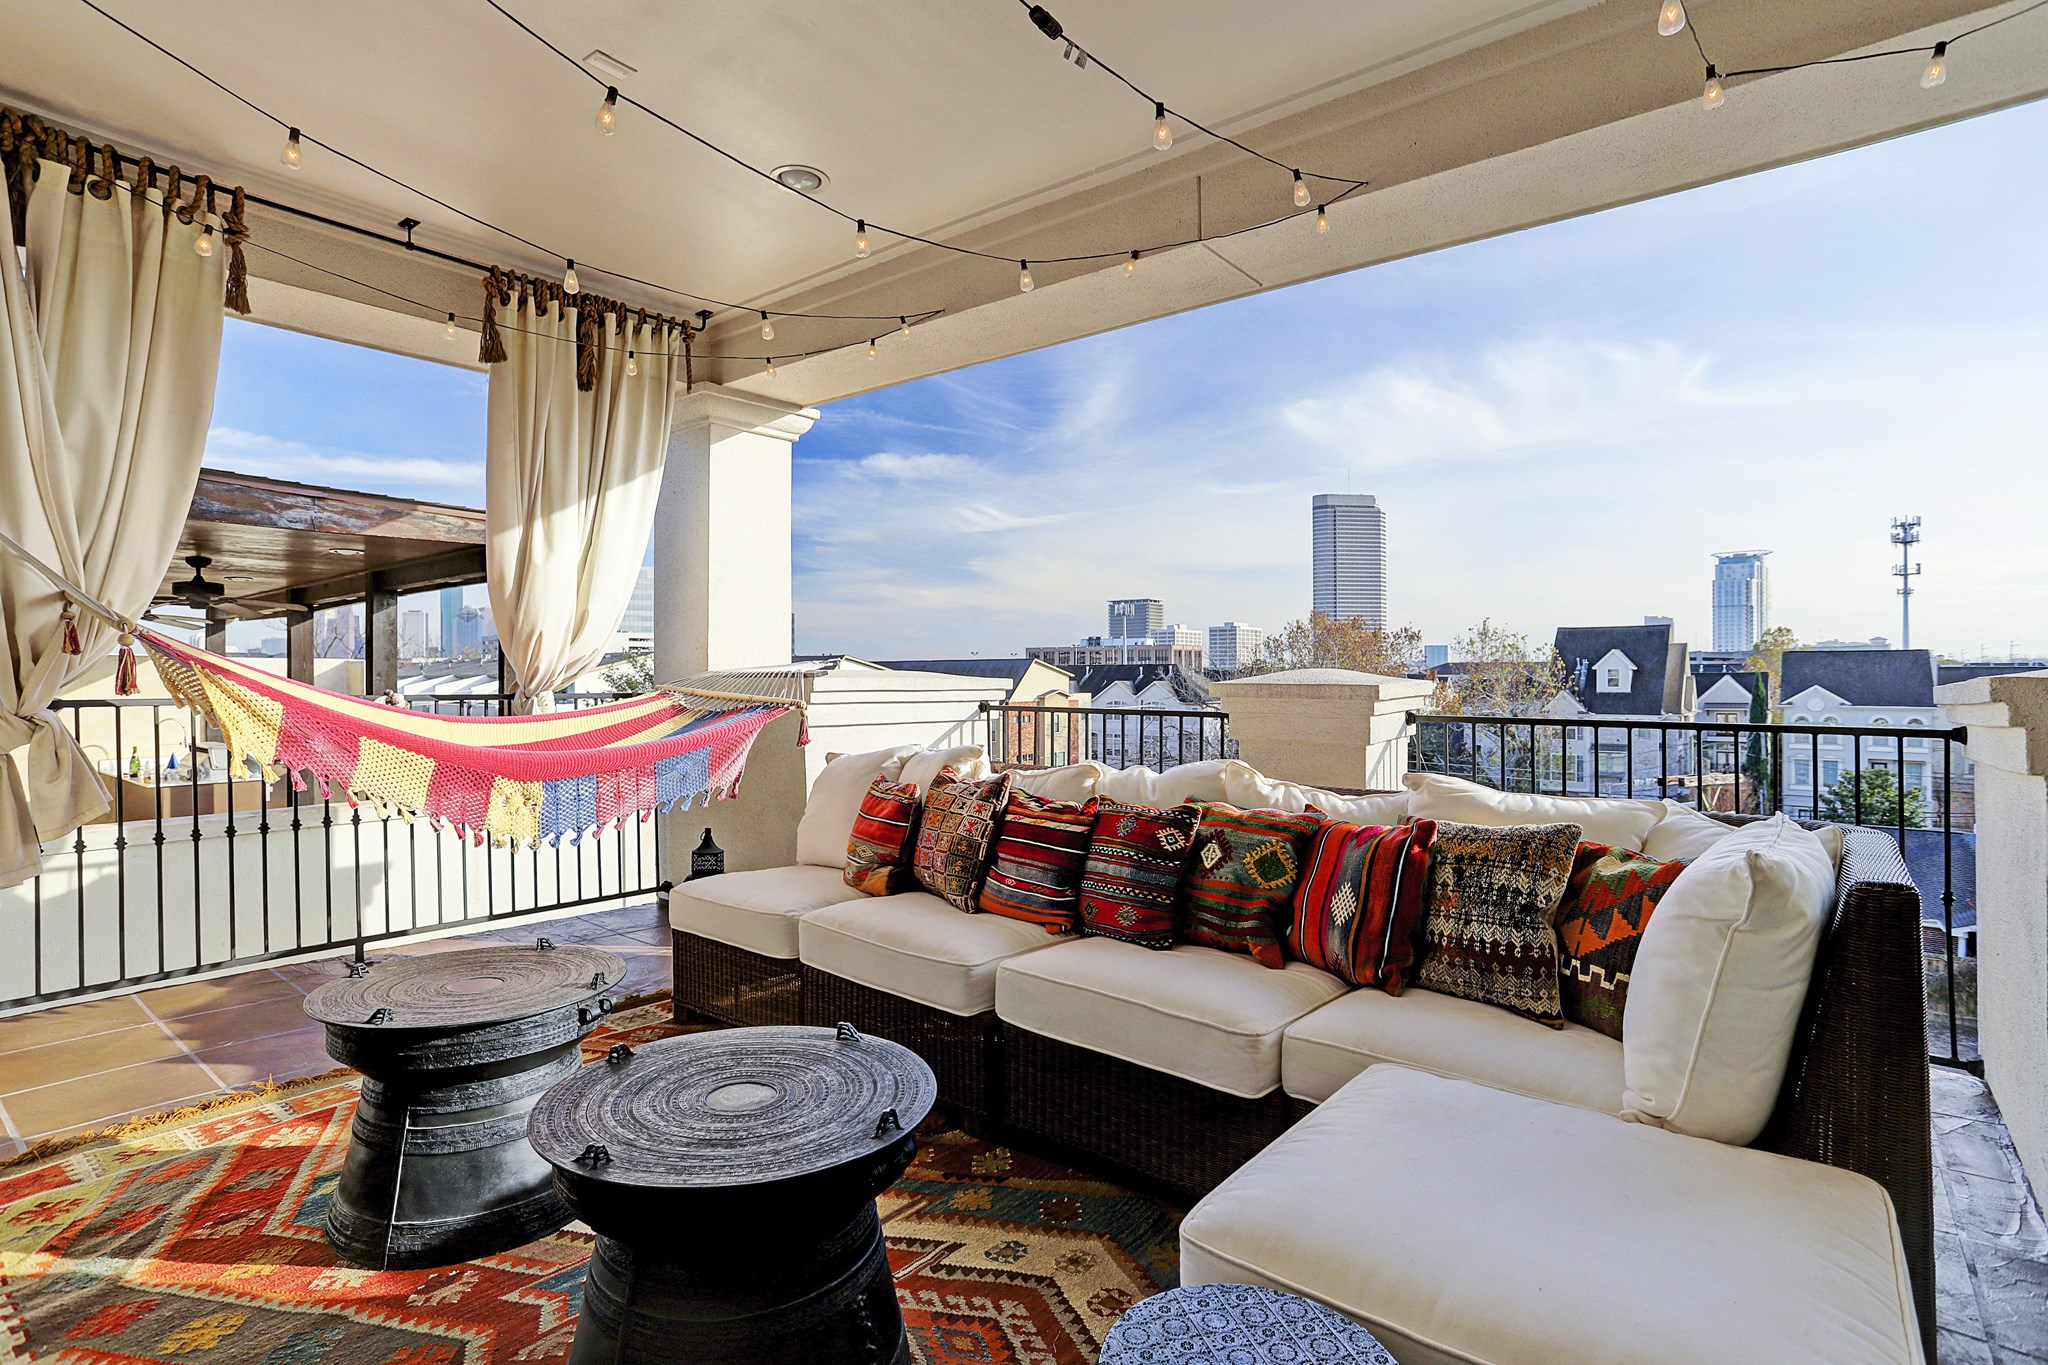 Covered rooftop patio with views of downtown. Party lights will remain.